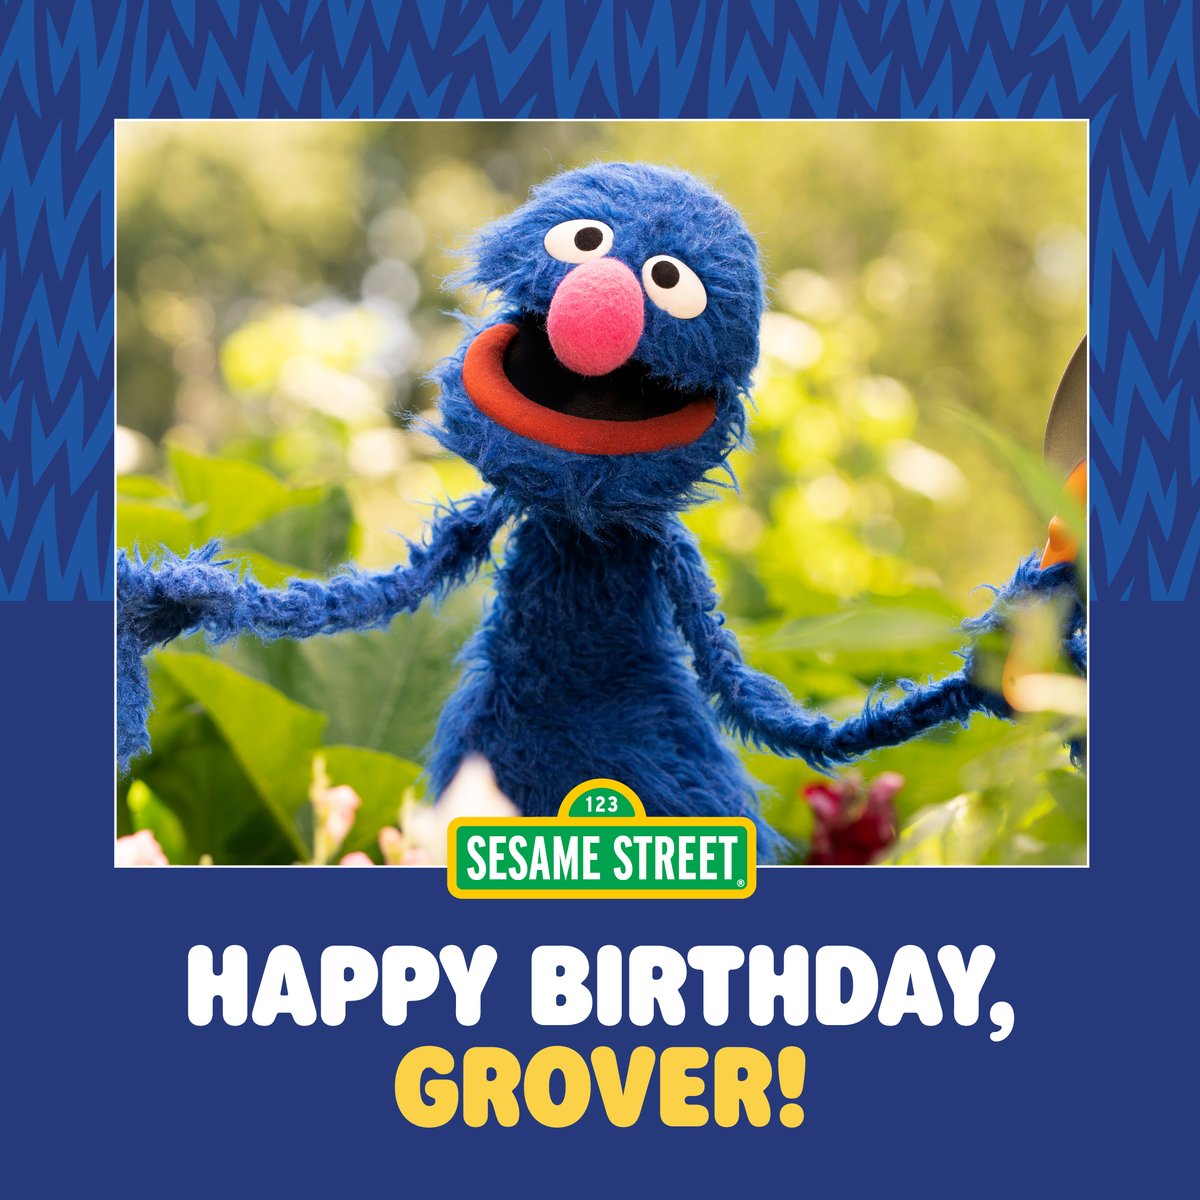 Happy birthday to the monster at the end of this post, @Grover! #HappyBirthdayGrover